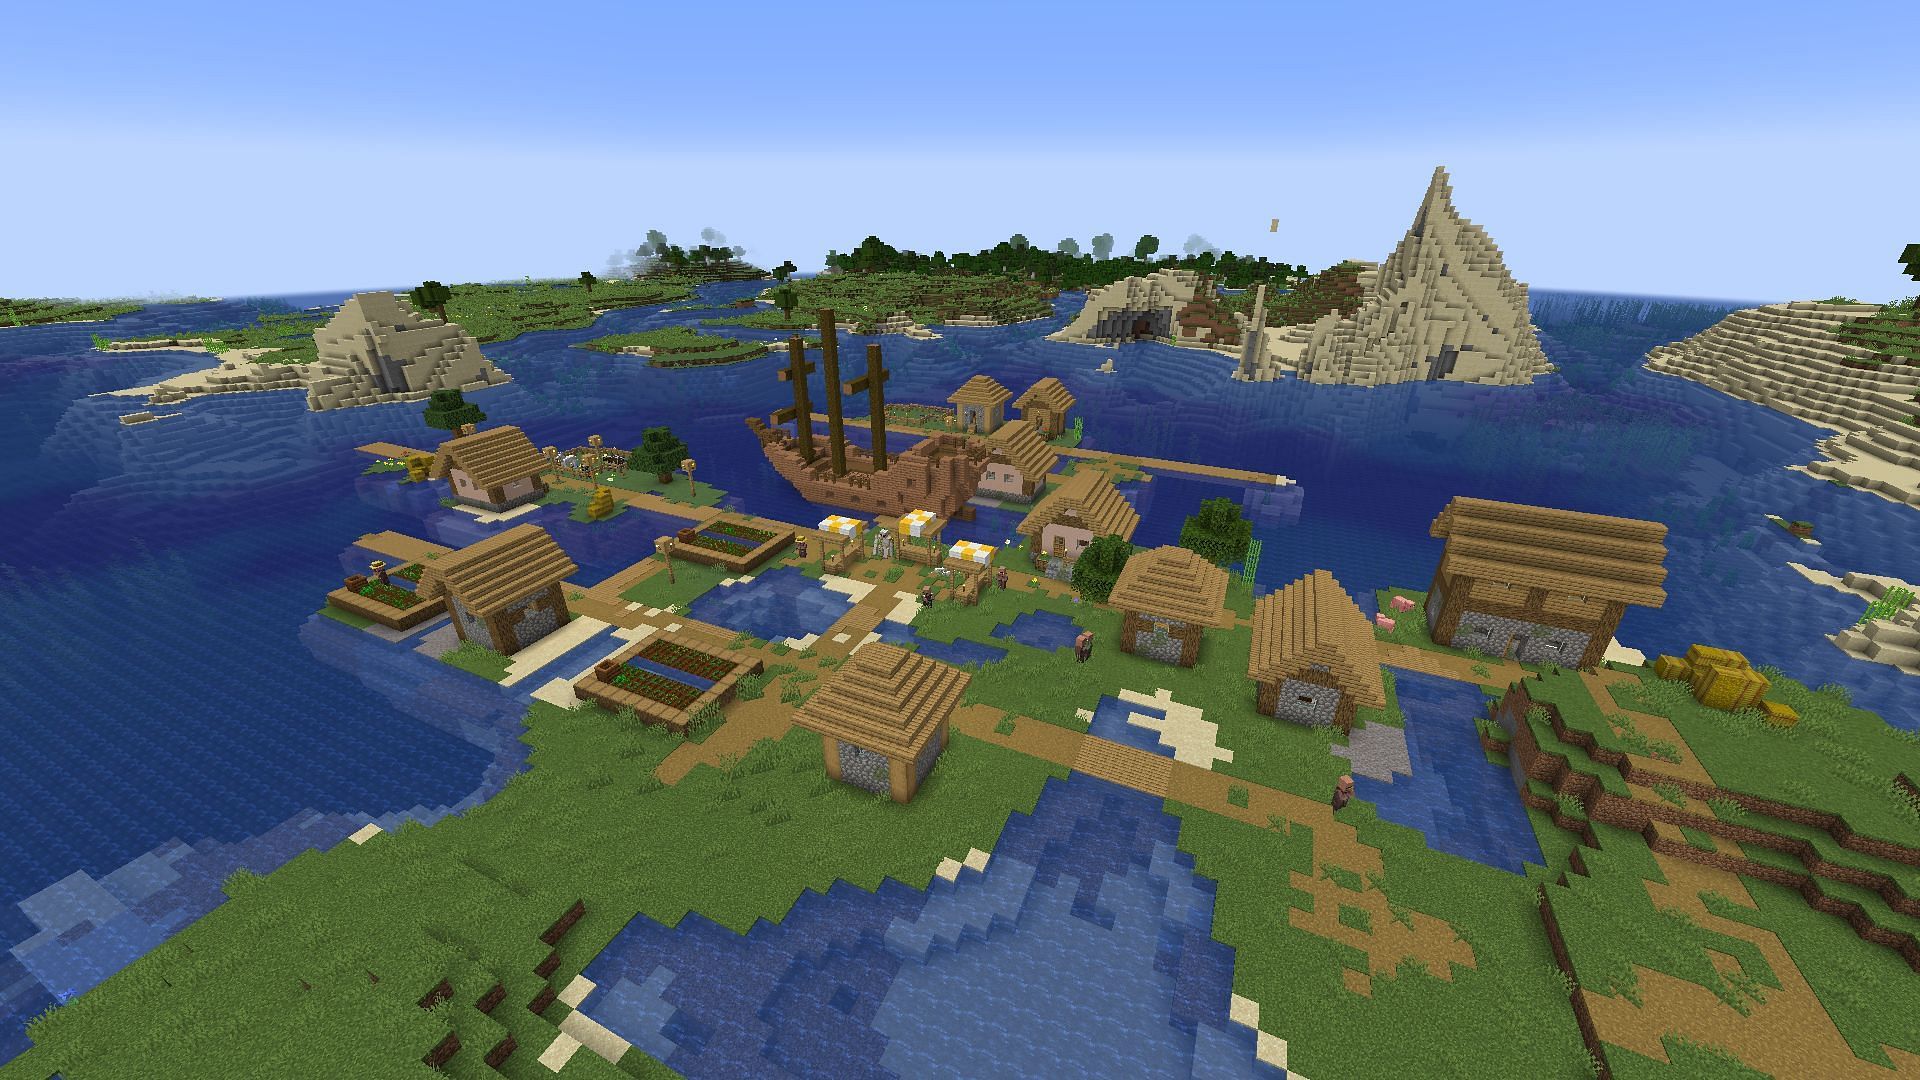 This cozy village spawn comes with its own complete ship! (Image via Mojang)